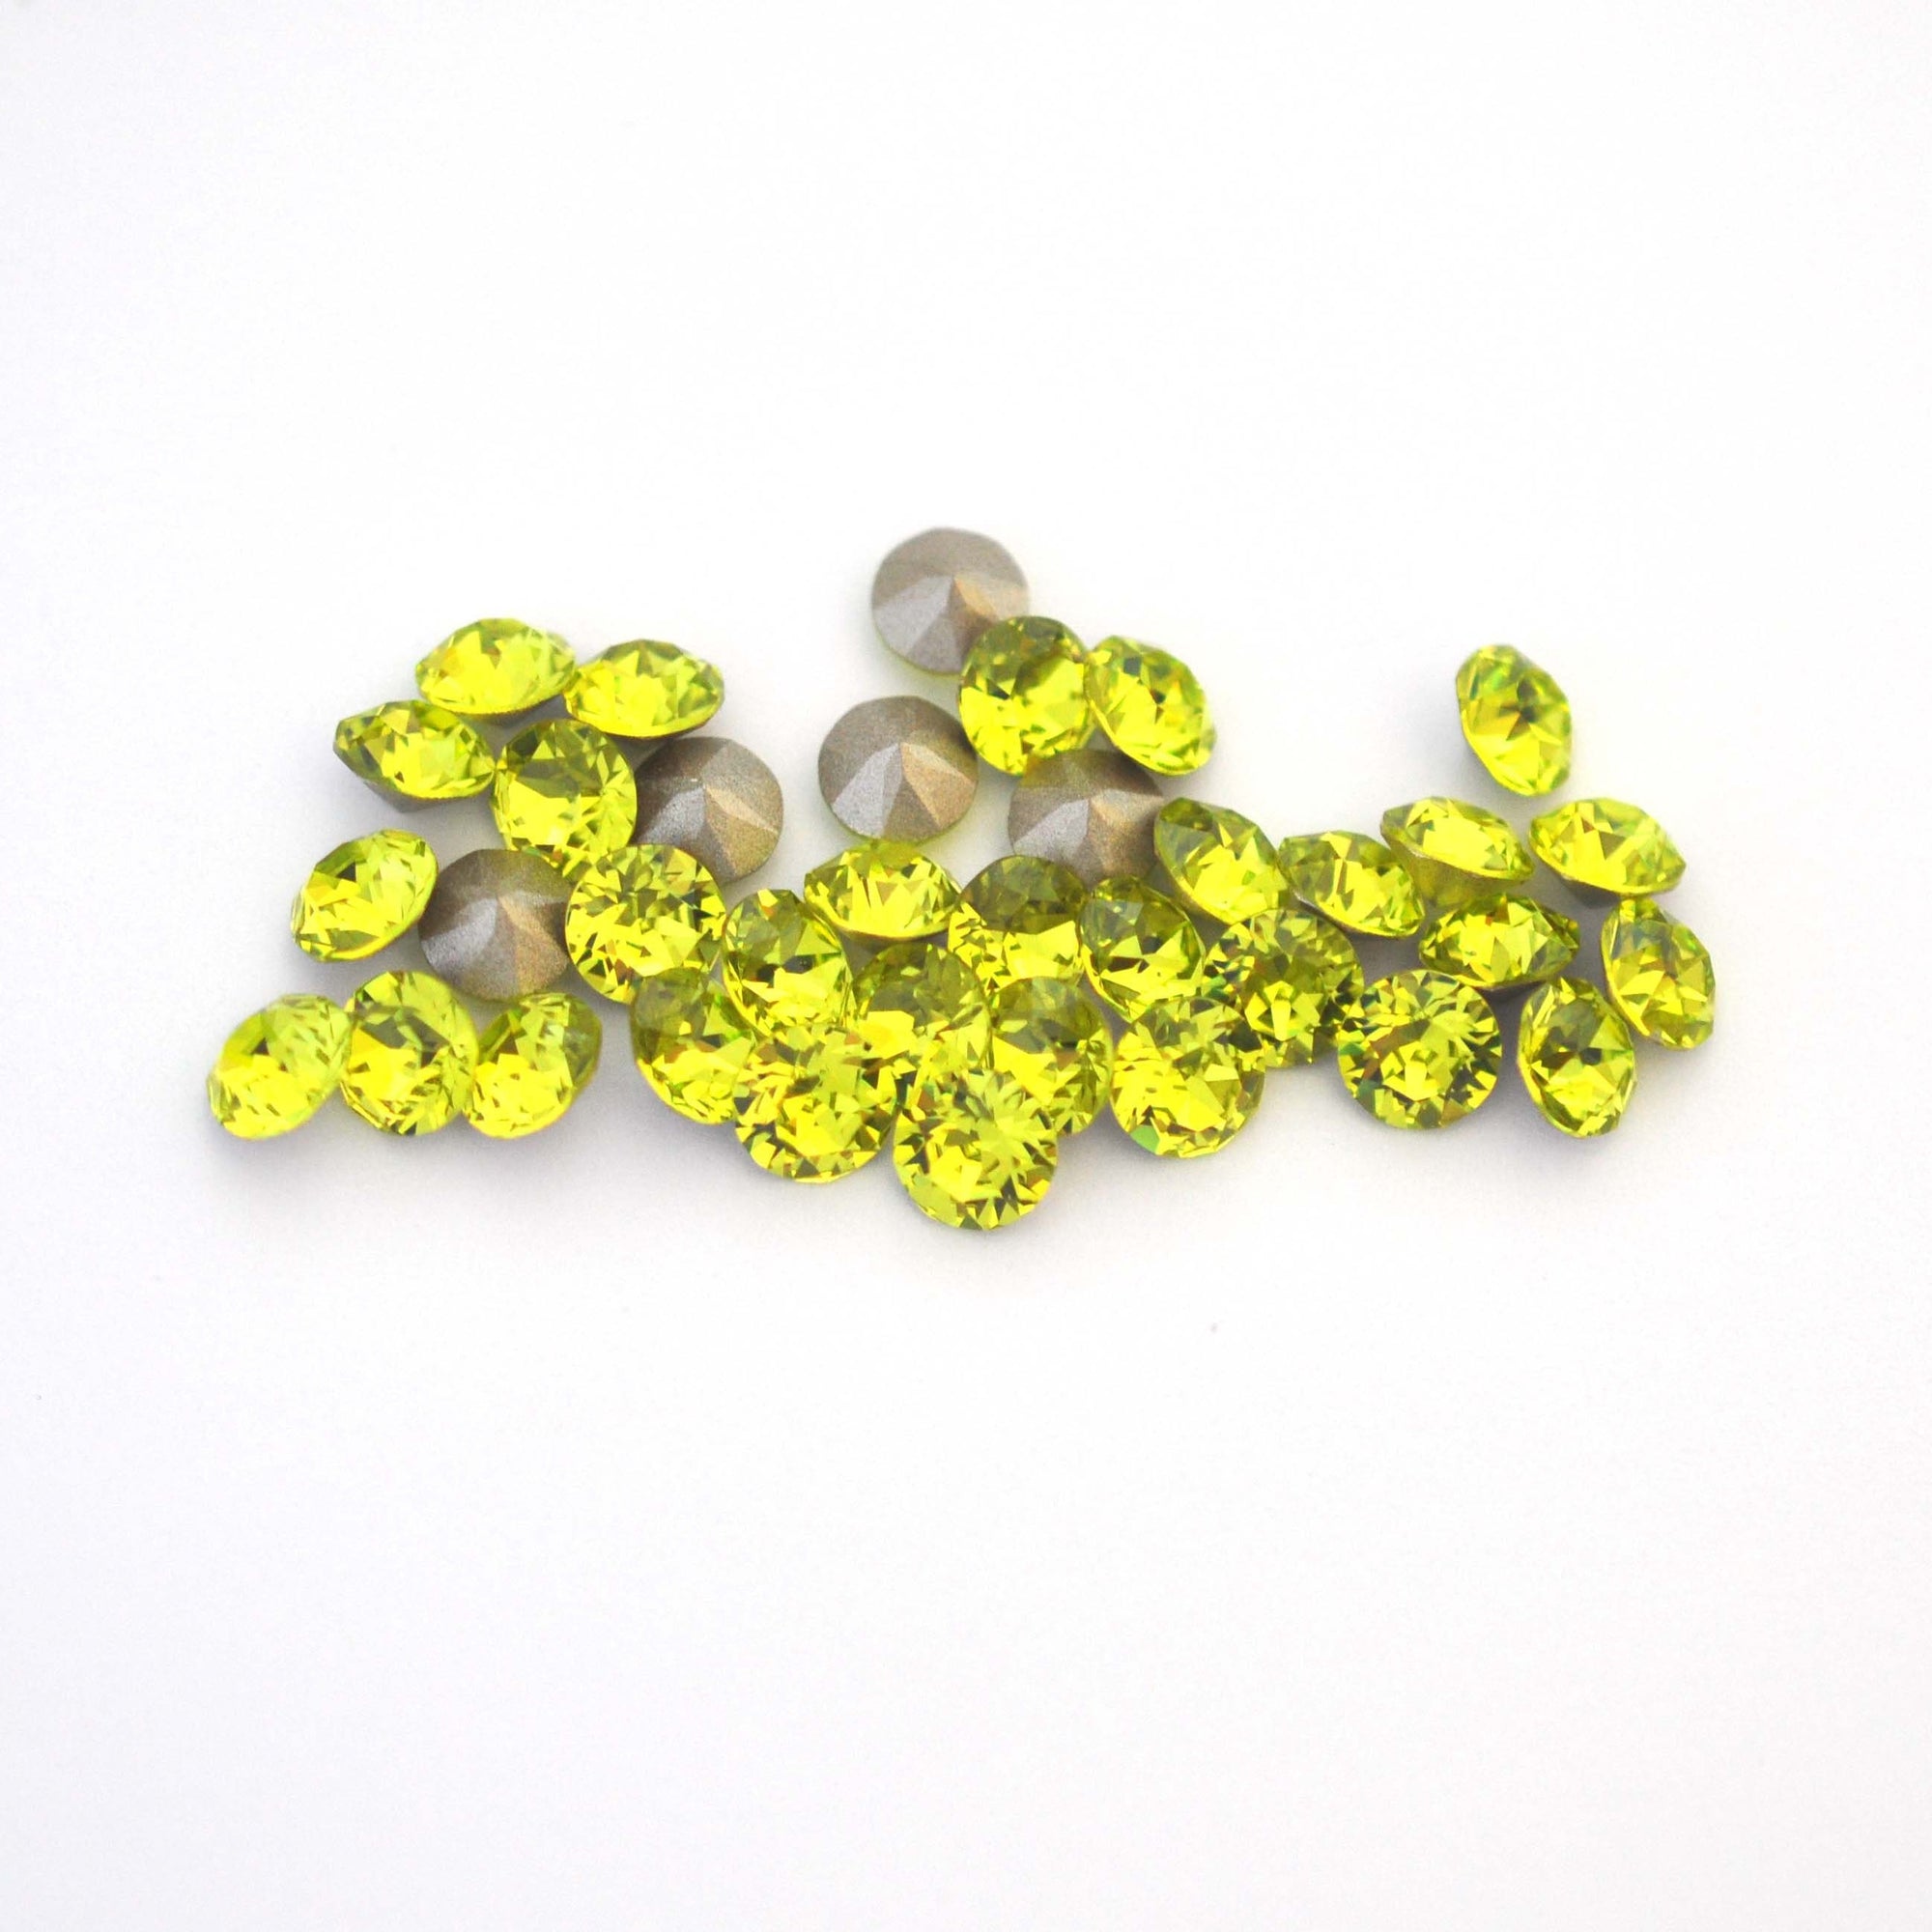 Citrus Green 1088 Pointed Back Chaton Barton Crystal 29ss, 6mm